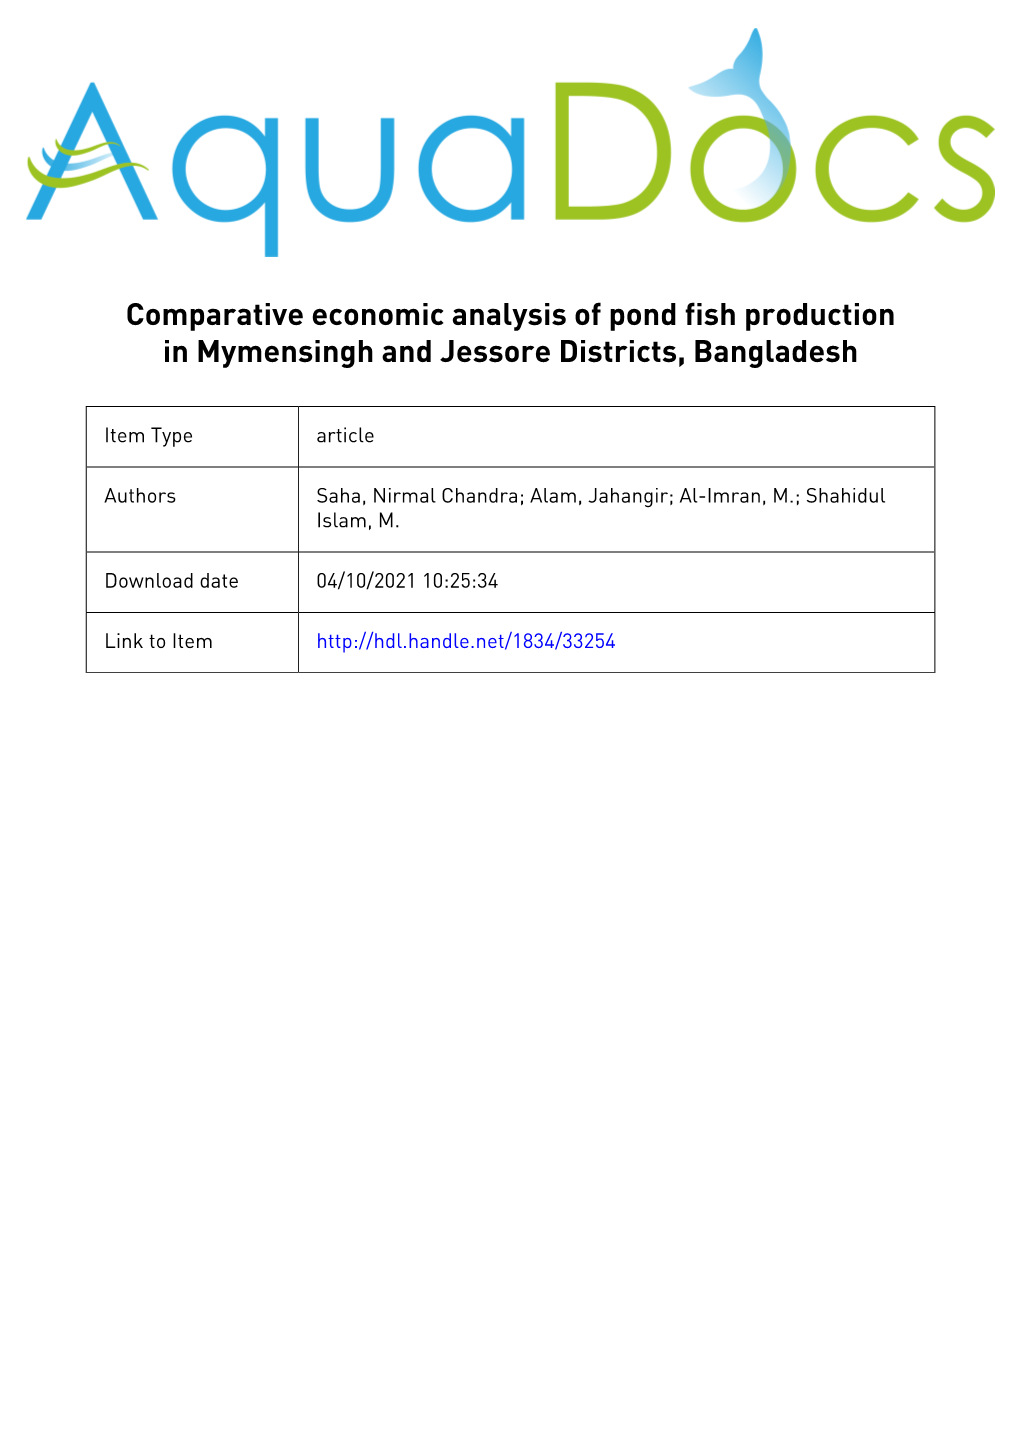 Comparative Economic Analysis of Pond Fish Production in Mymensingh and Jessore Districts, Bangladesh